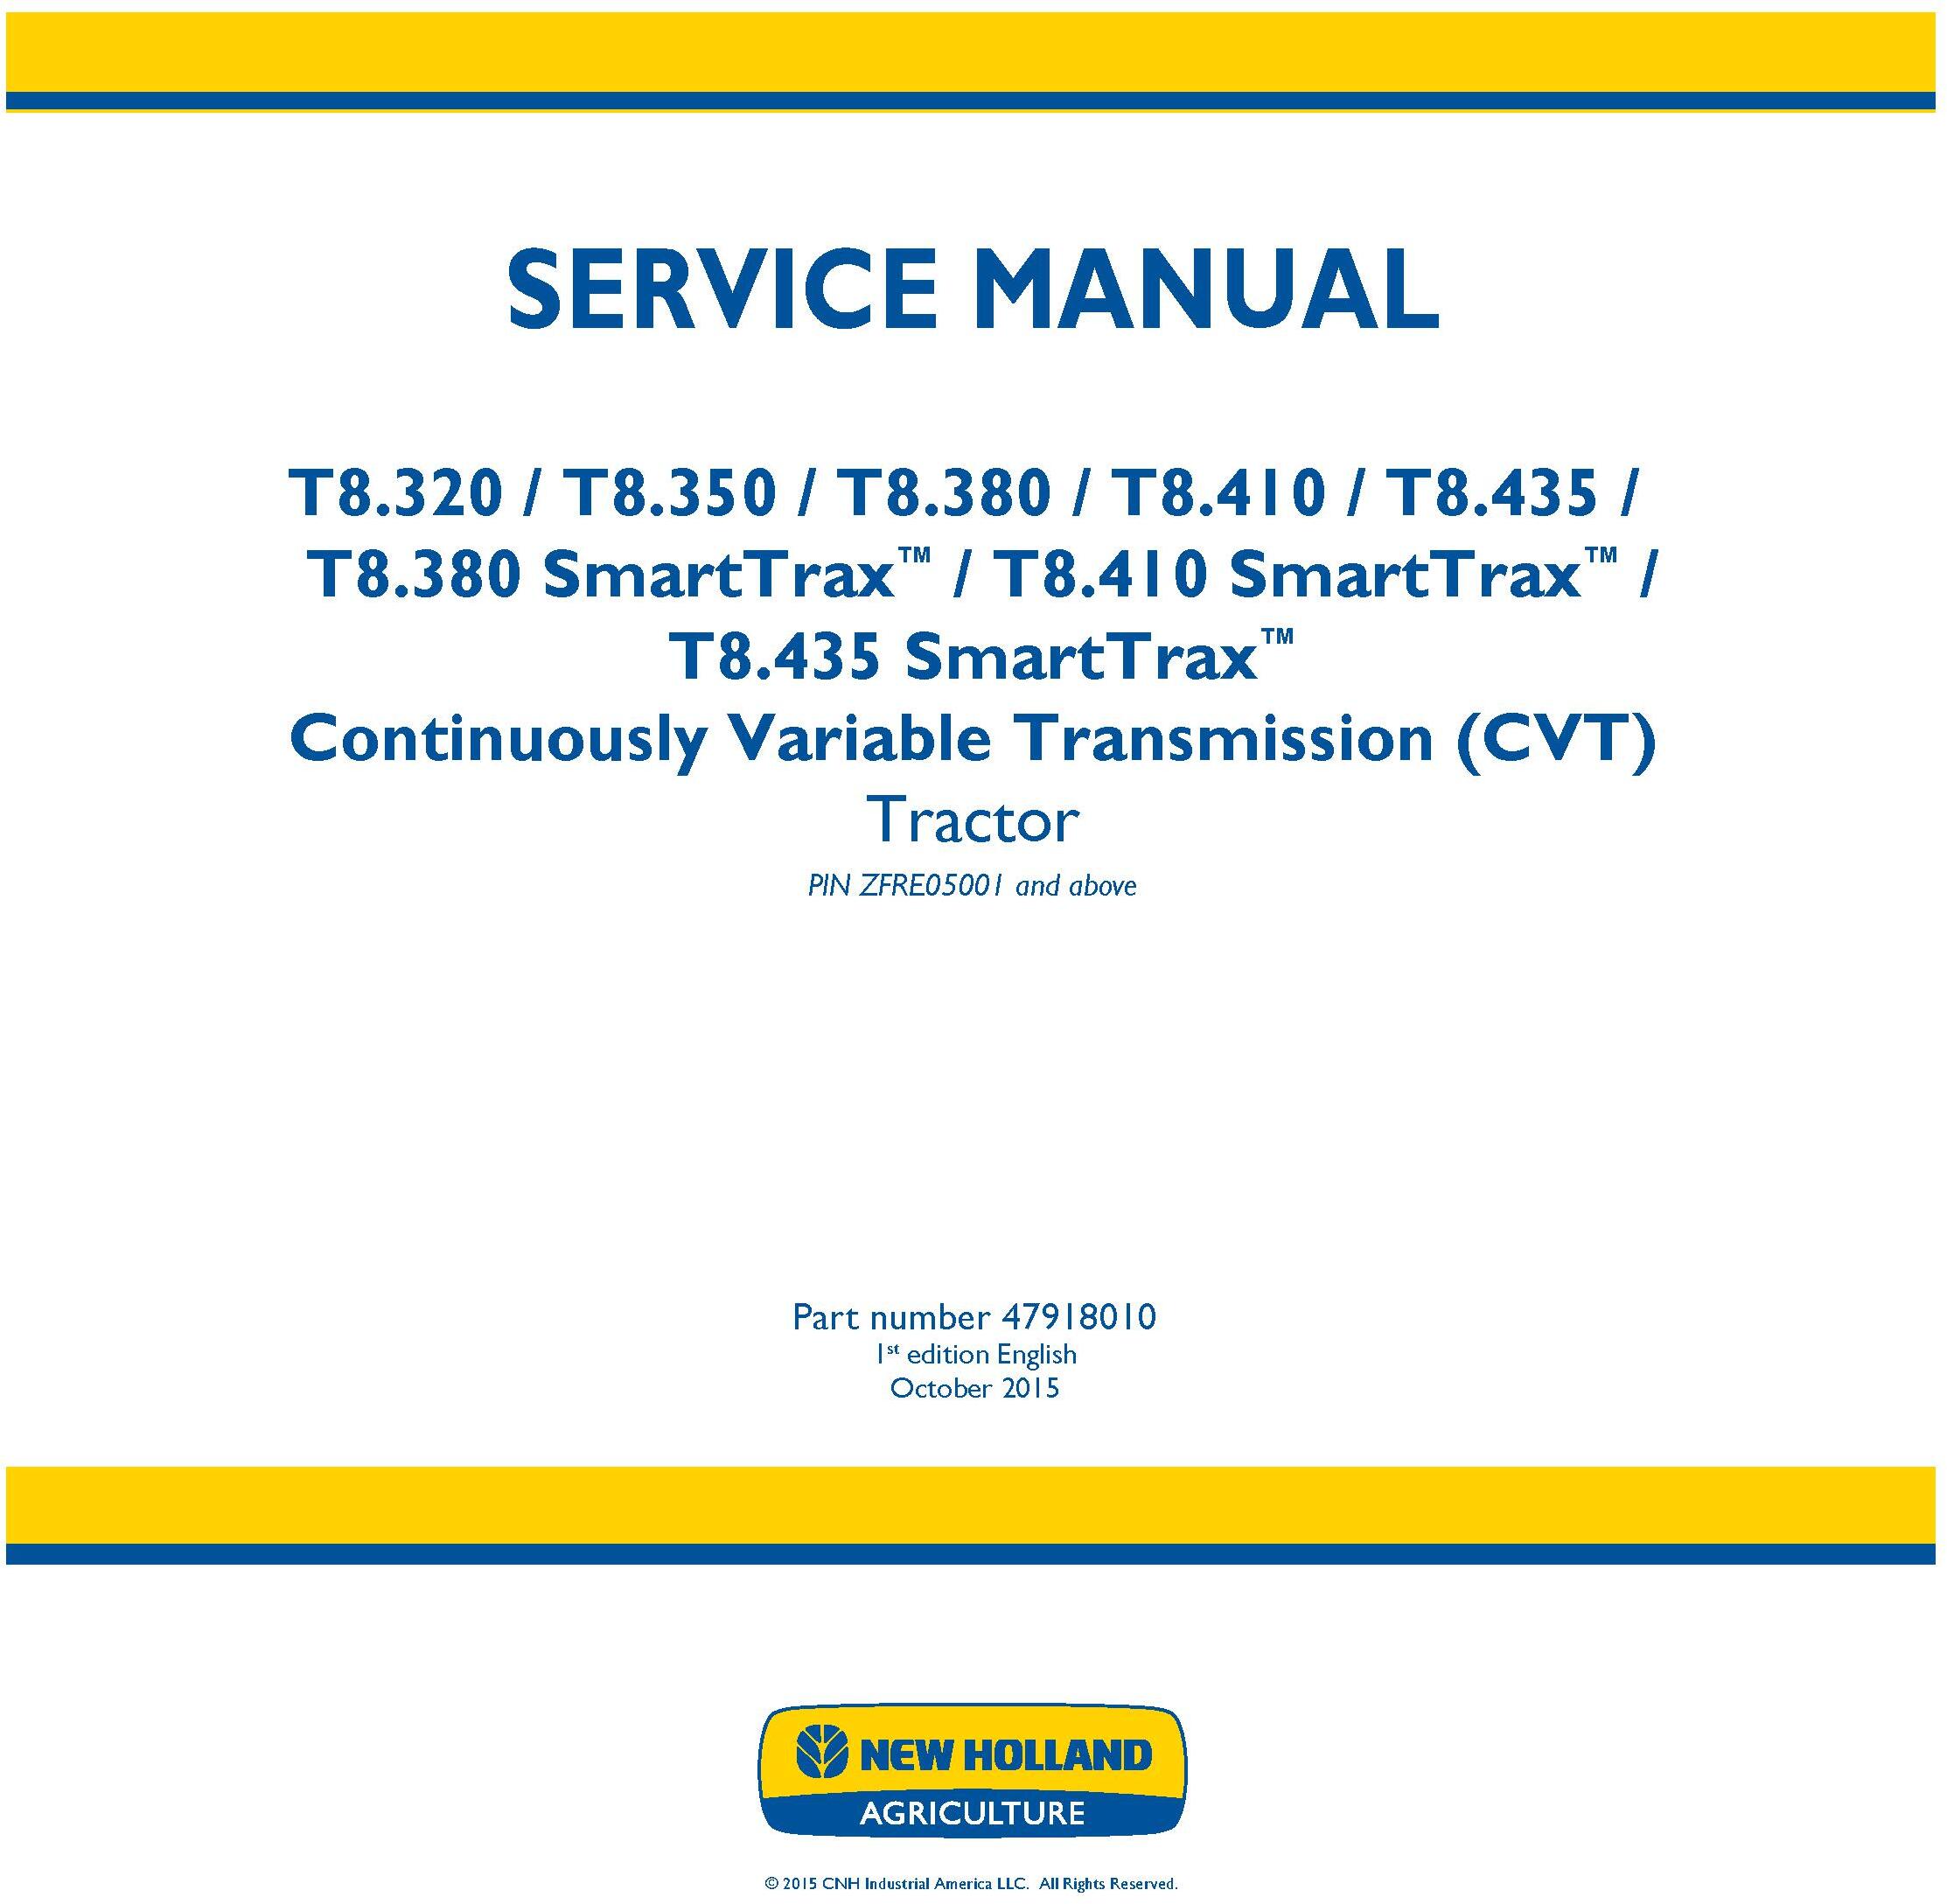 New Holland T8.320, T8.350, T8.380, T8.410, T8.435 and SmartTrax Tier 2 CVT Tractor Service Manual